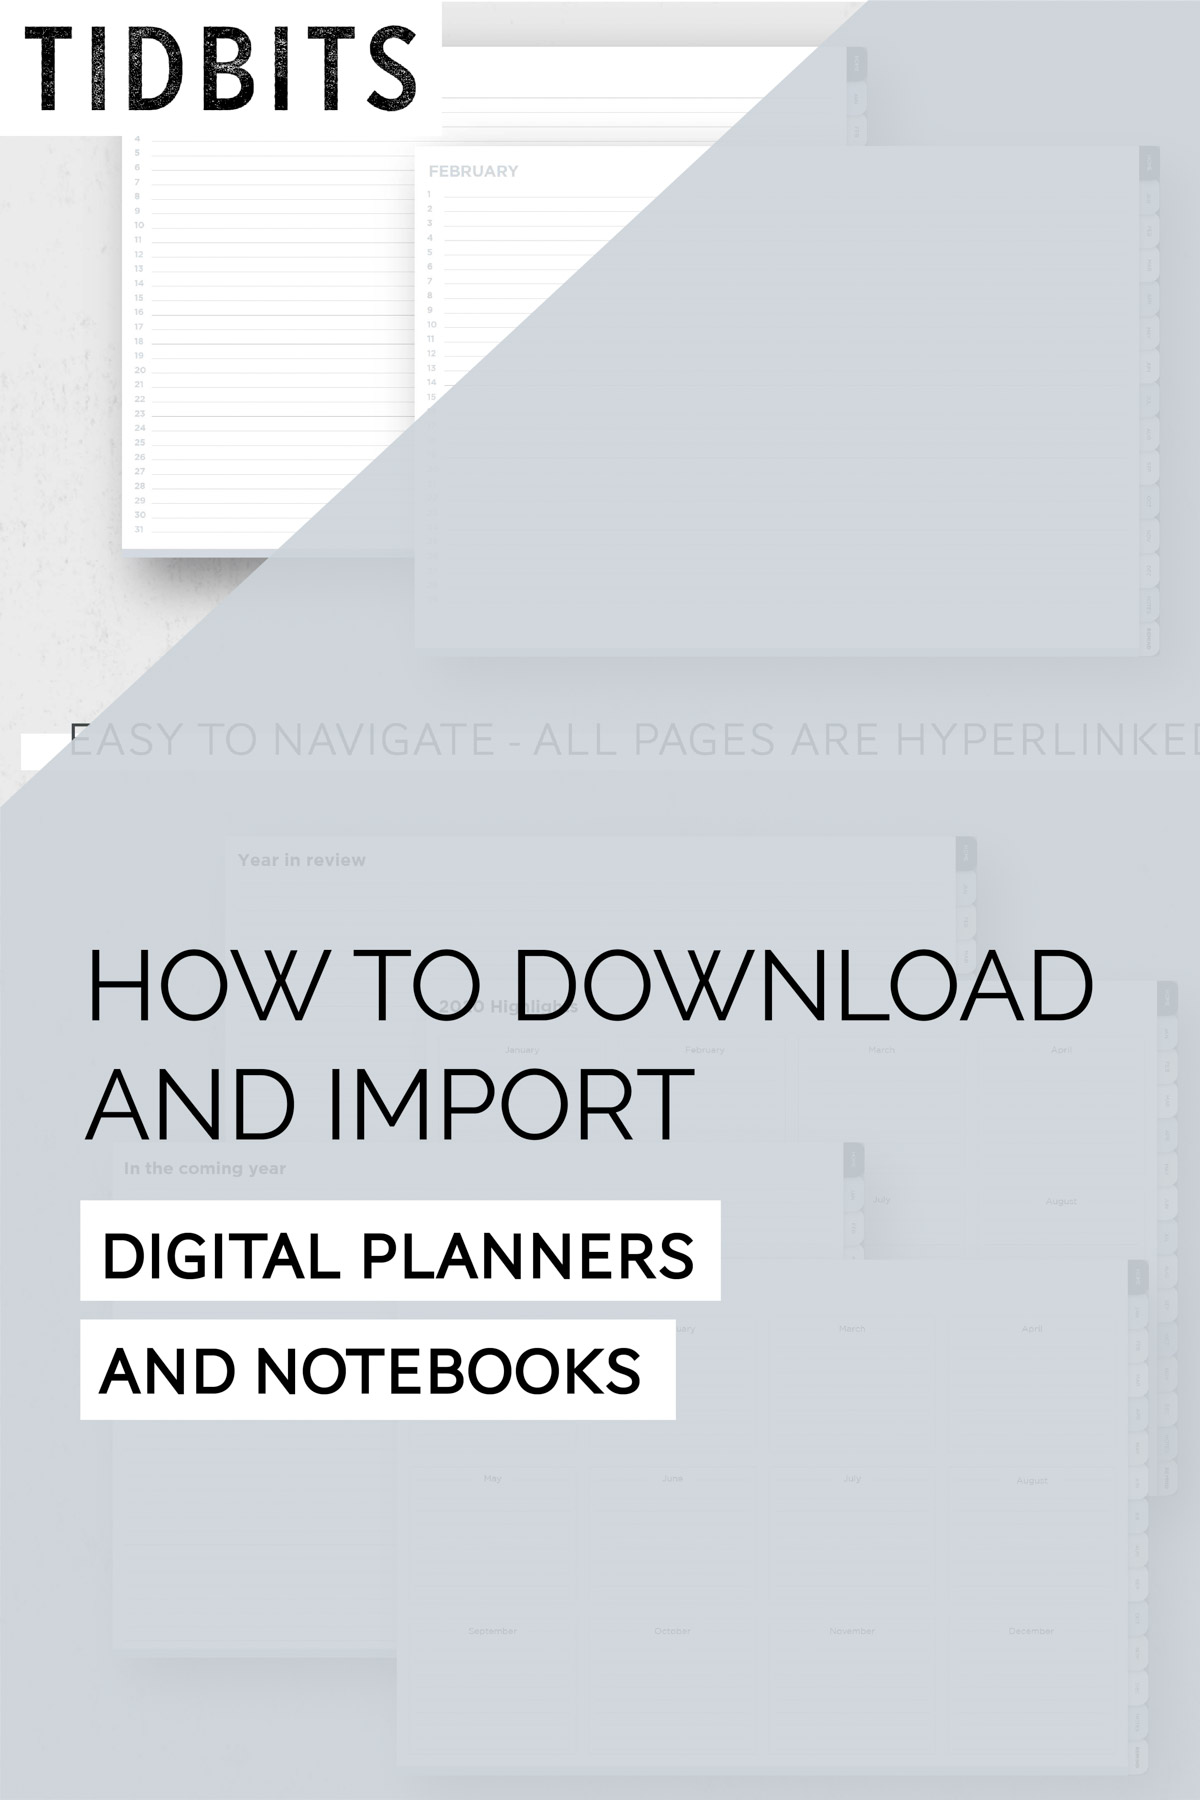 How to Download and Import digital planners and notebooks